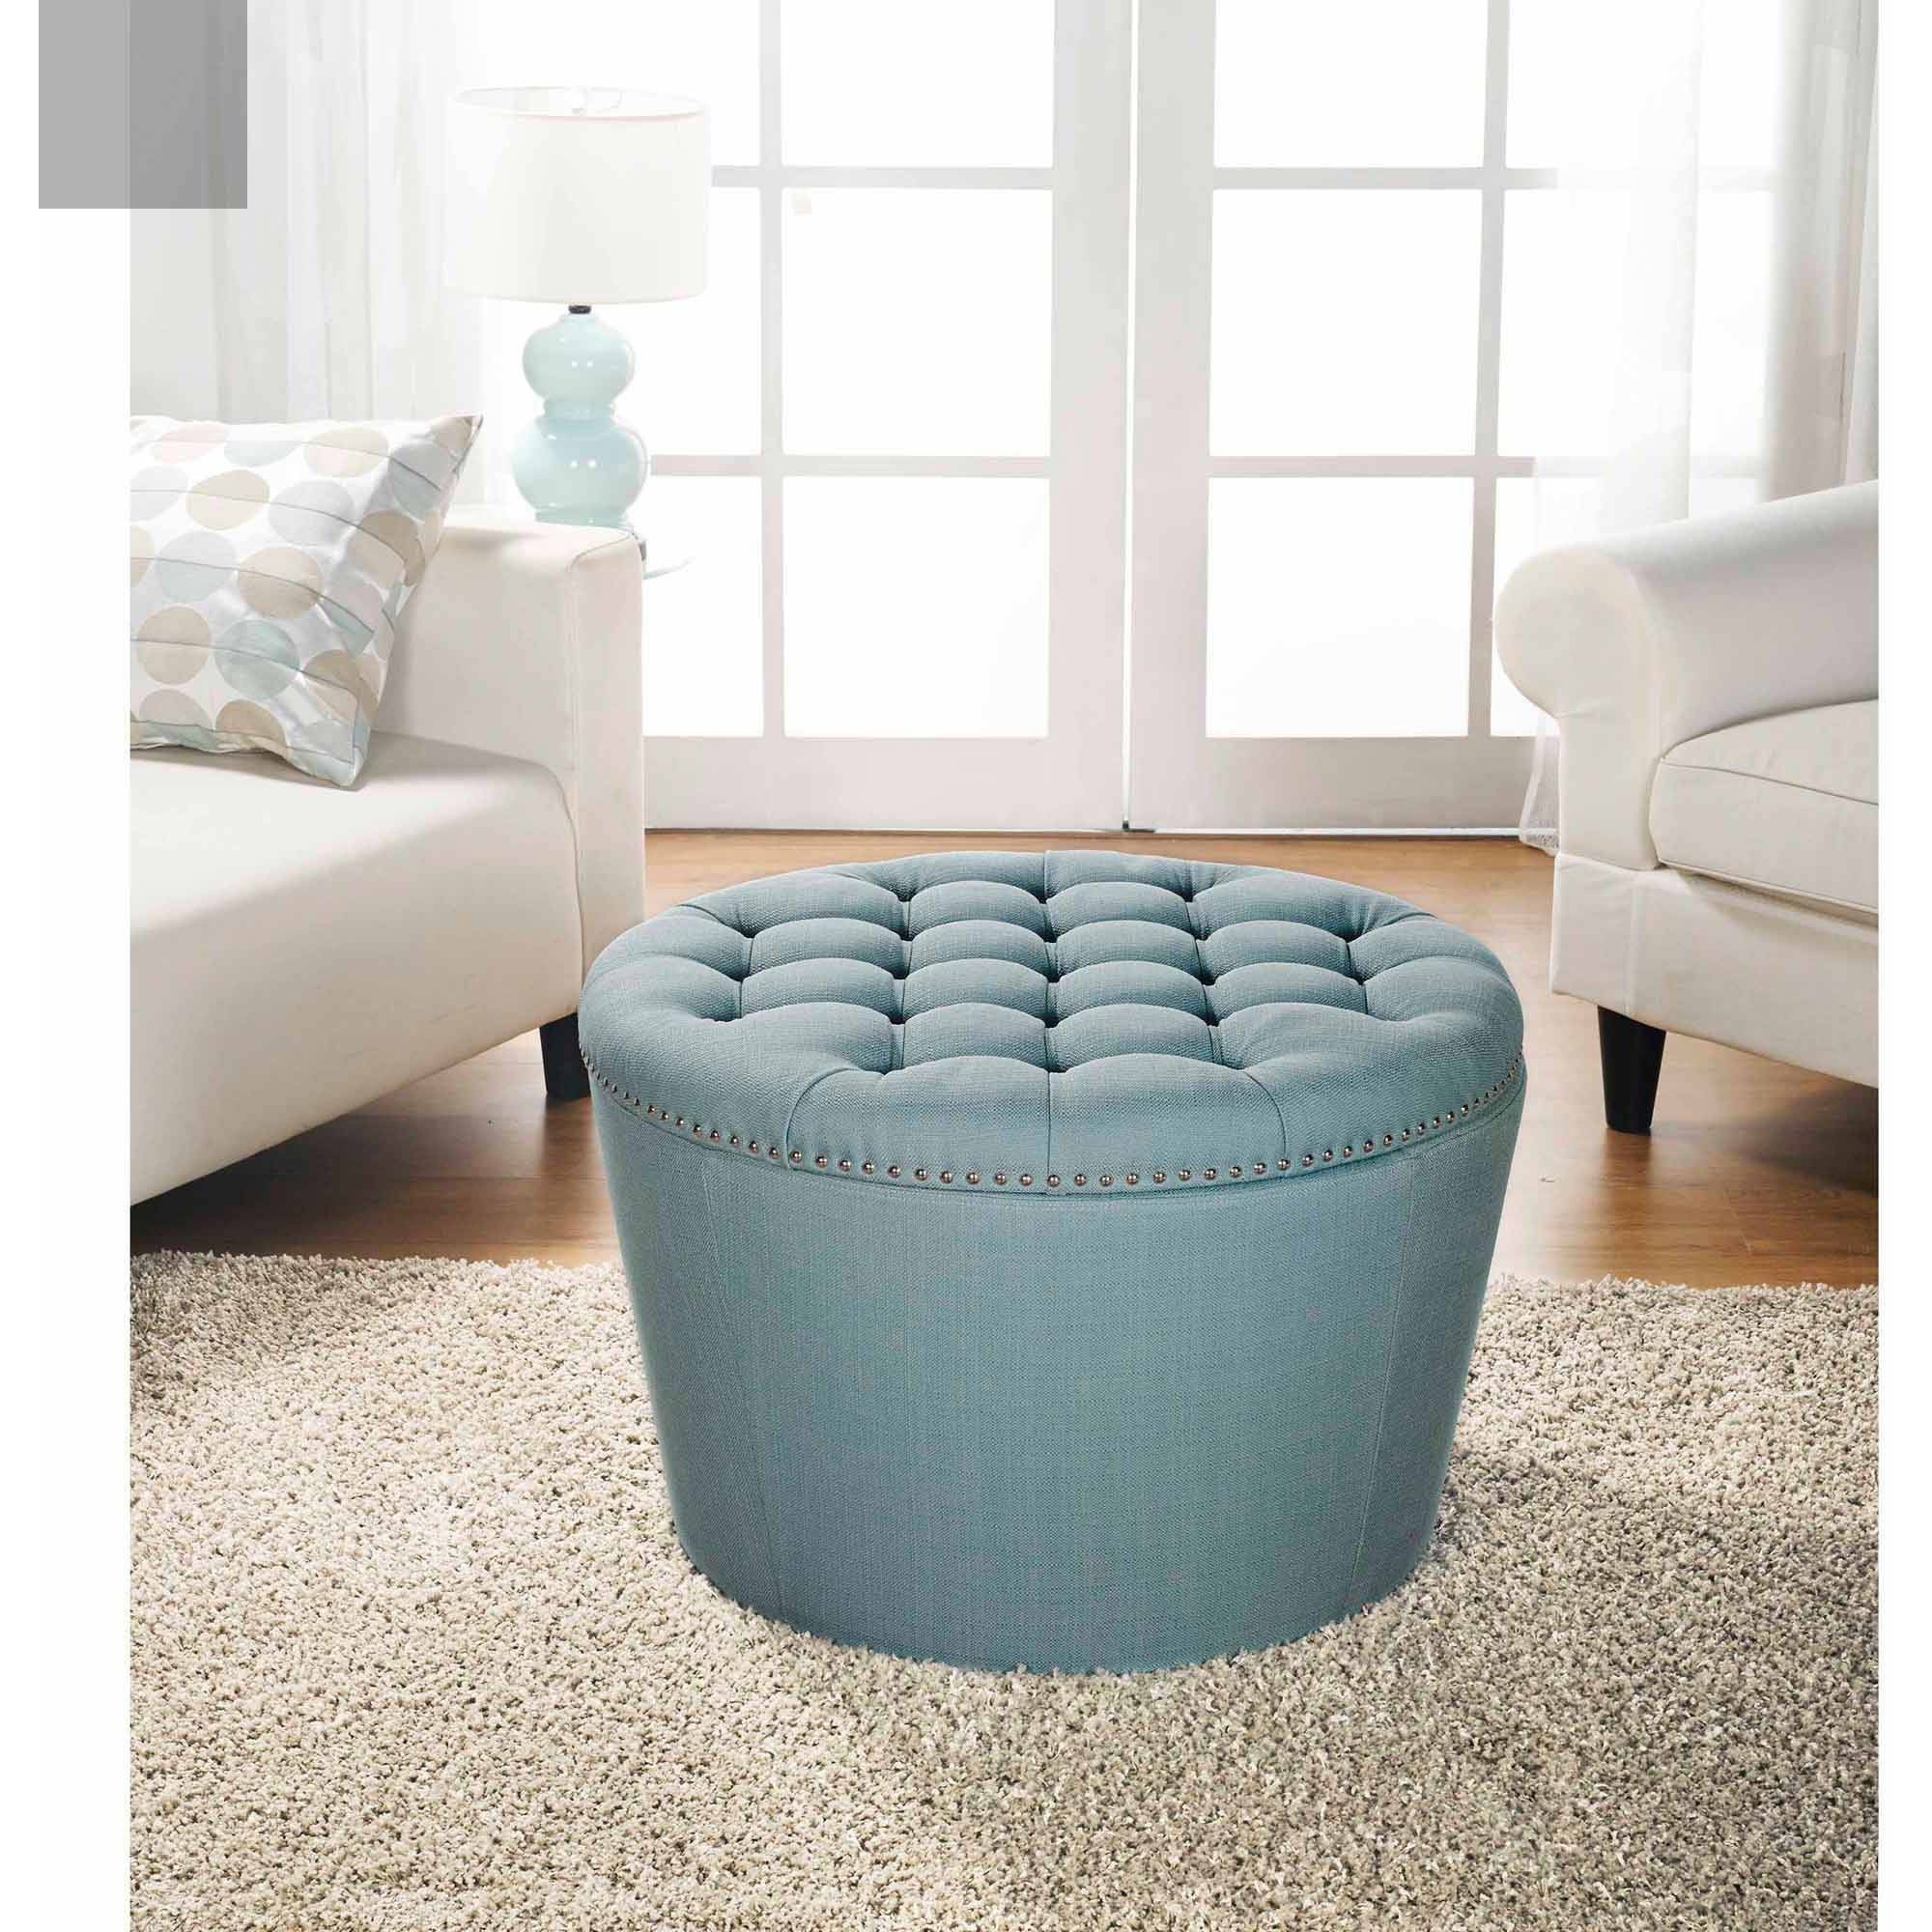 Better Homes And Gardens Round Tufted Storage Ottoman With Nailheads Inside Blue Round Storage Ottomans Set Of  (View 15 of 20)